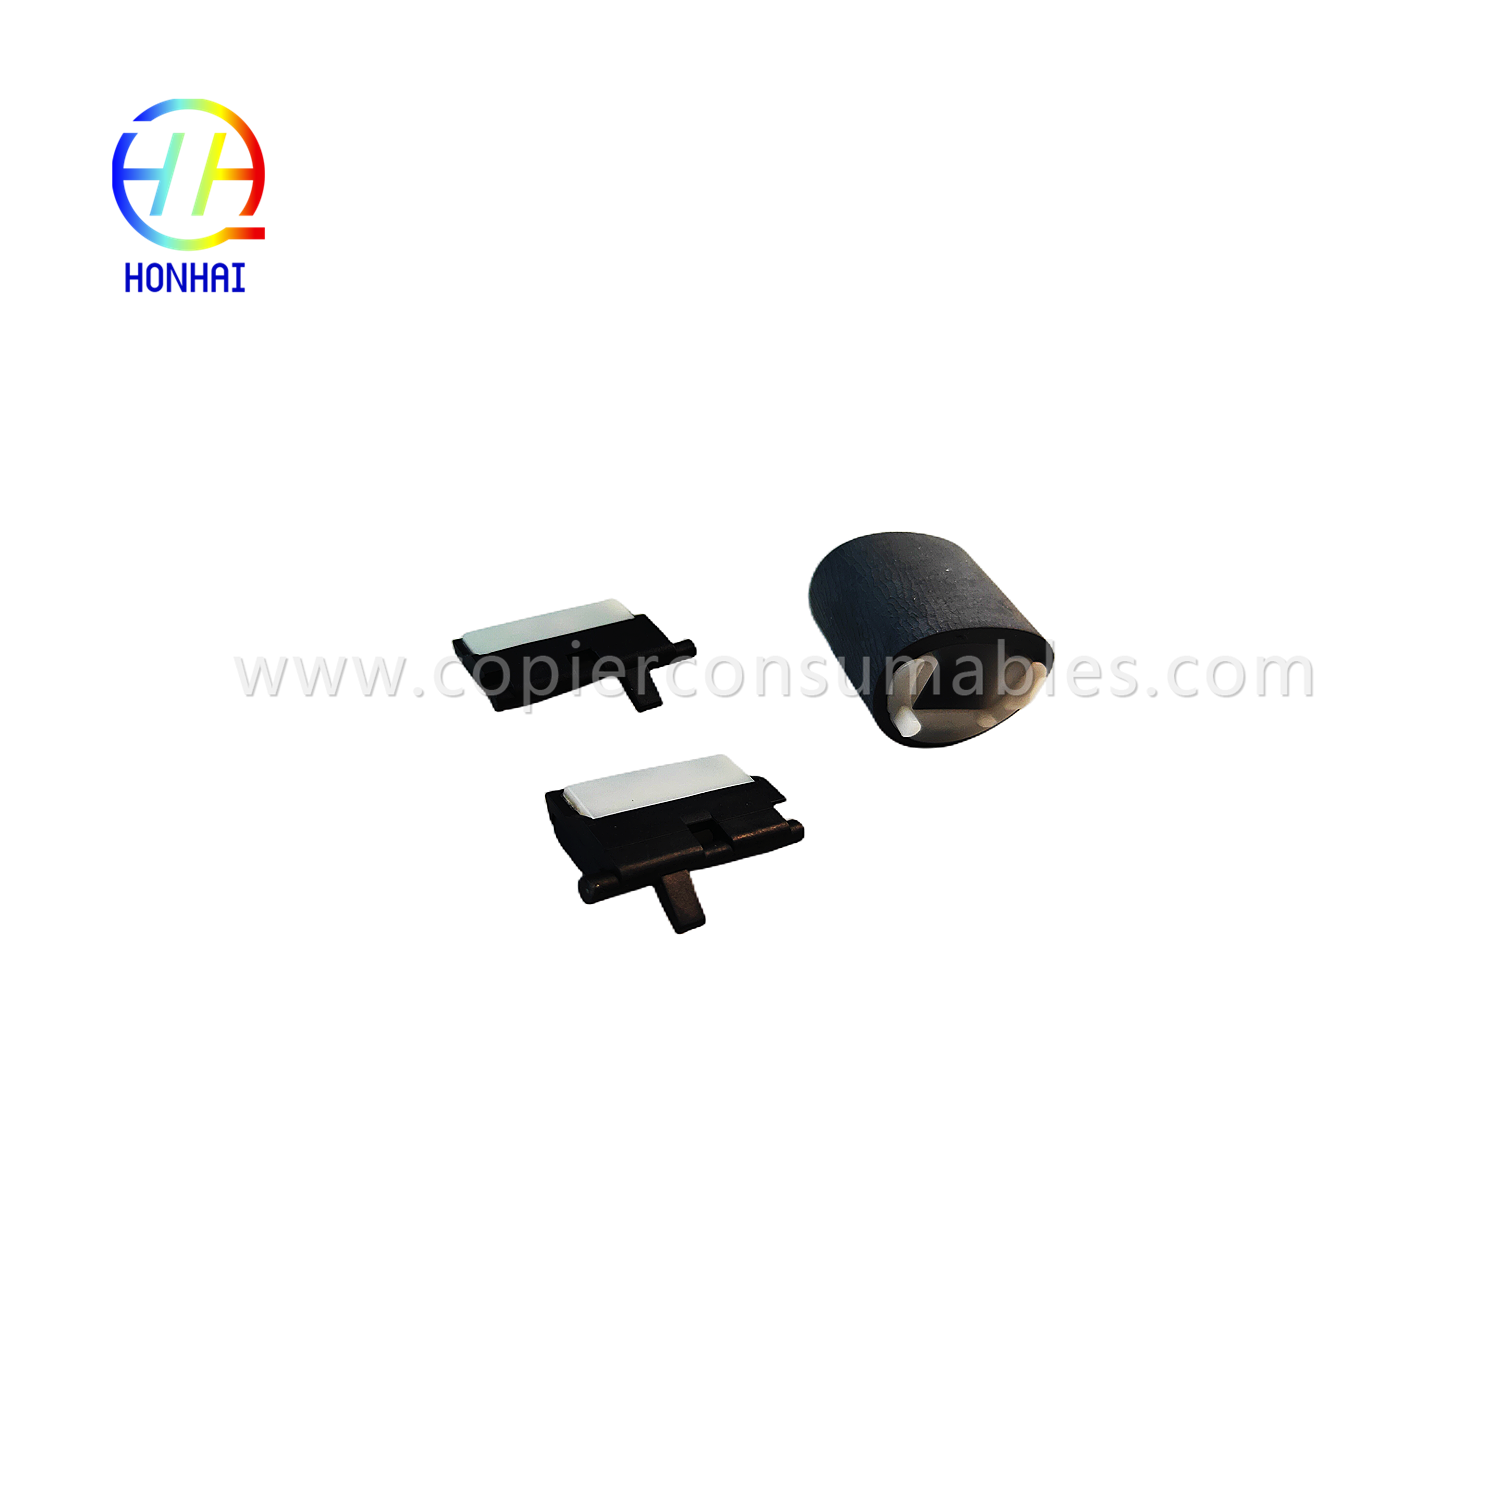 https://www.copierconsumables.com/paper-pickup-roller-separates-pad%ef%bc%88set%ef%bc%89for-hp-pagewide-x585z-x451dn-x476dn-x551dw-x576dw-566dn-5 452dn-477dn-552-577z-cb780-60012-product/